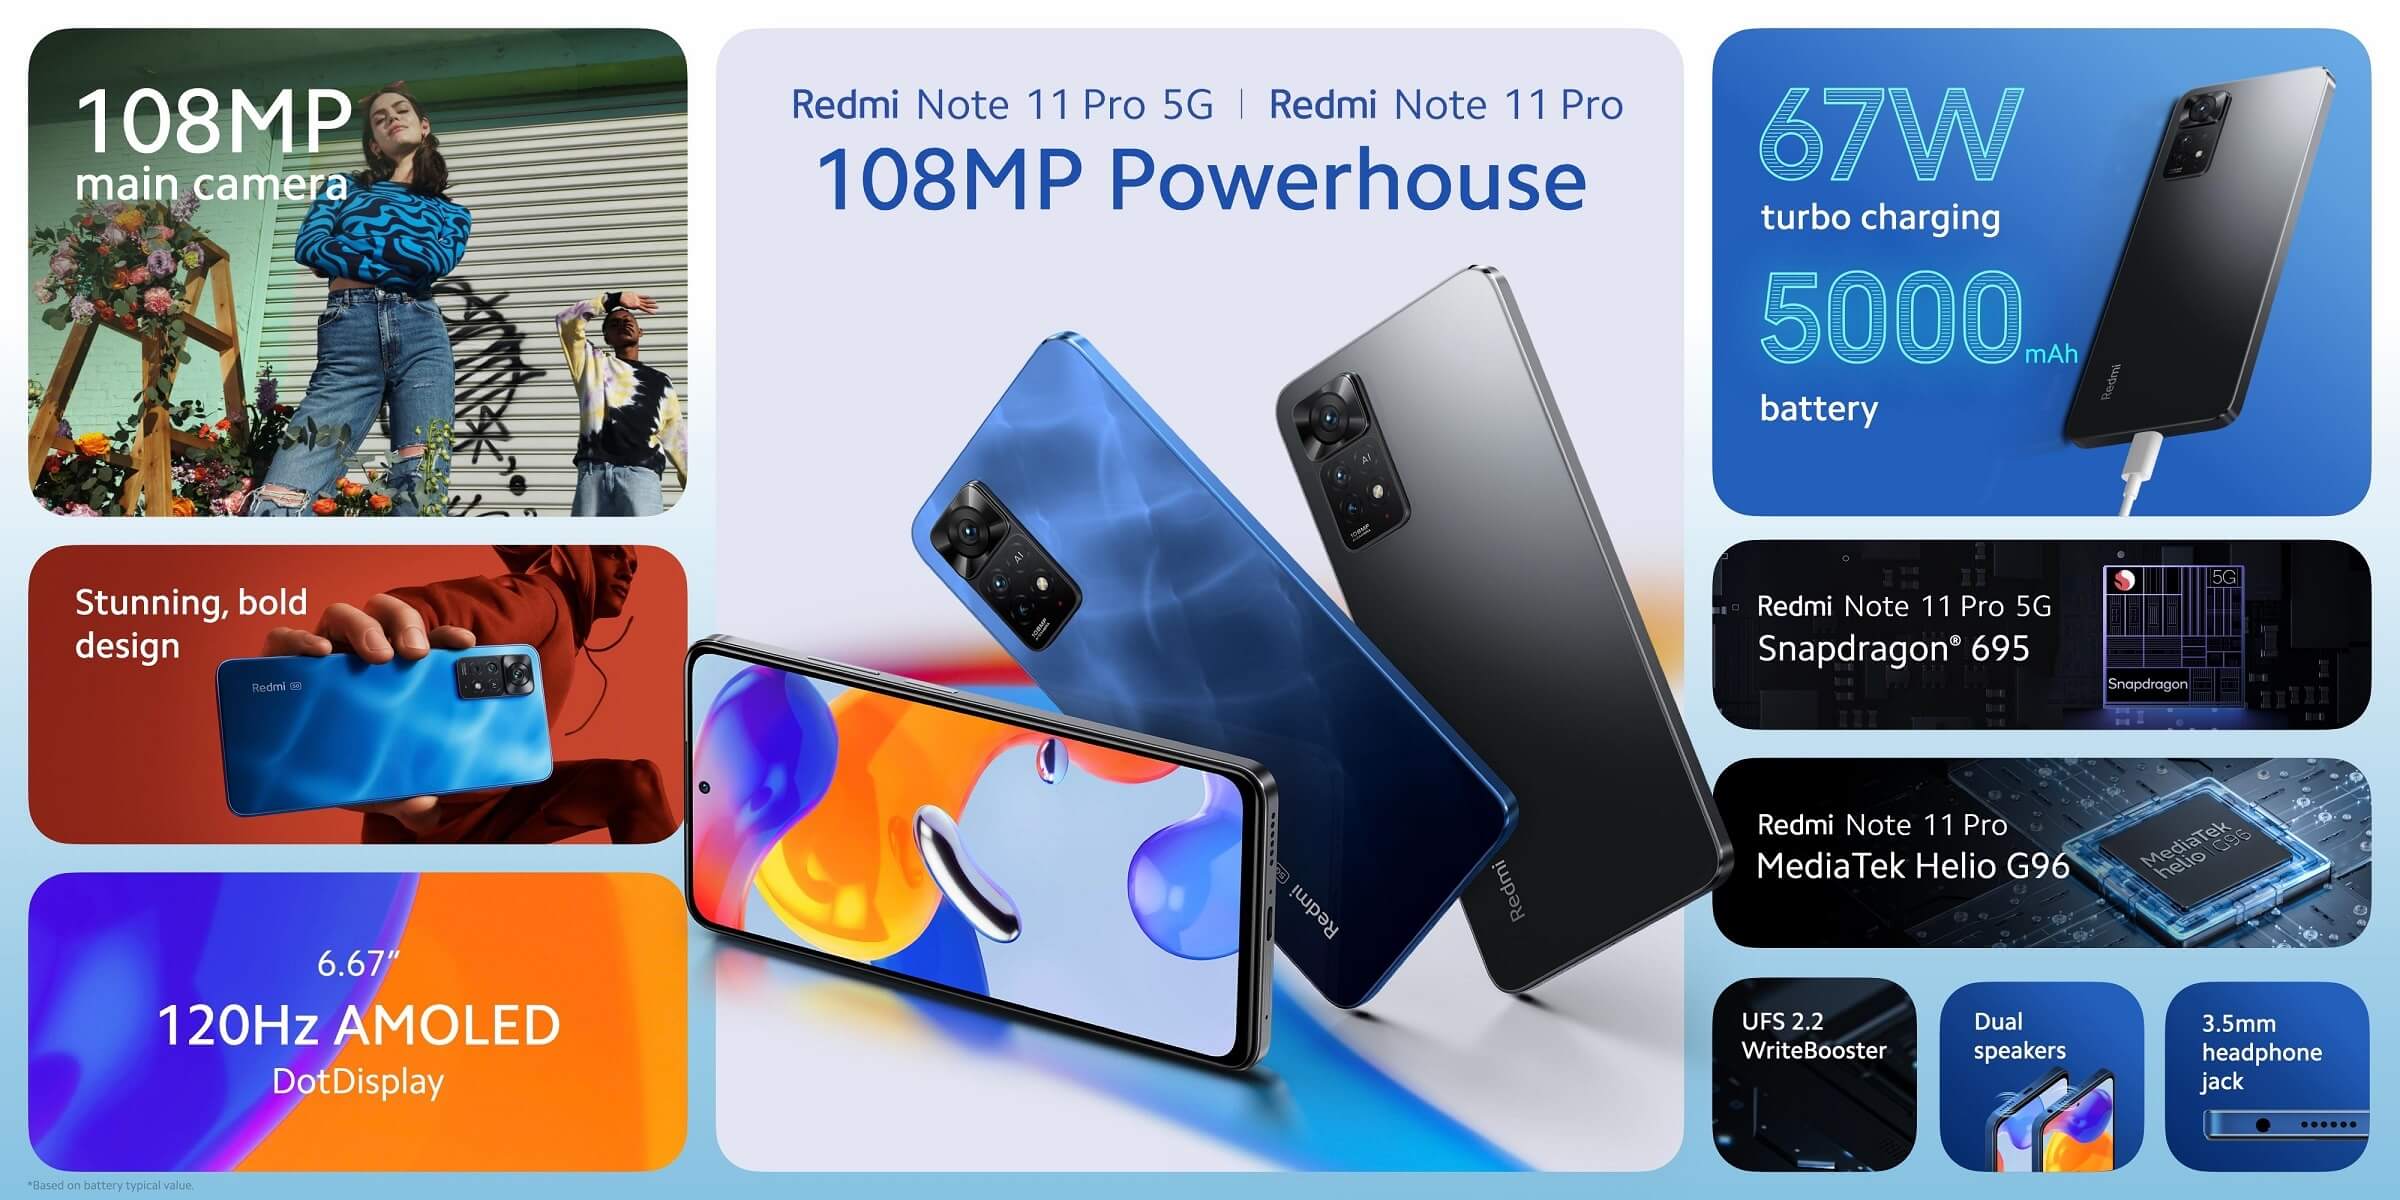 Redmi Note 11 Pro 5G and Note 11 Pro 4G features